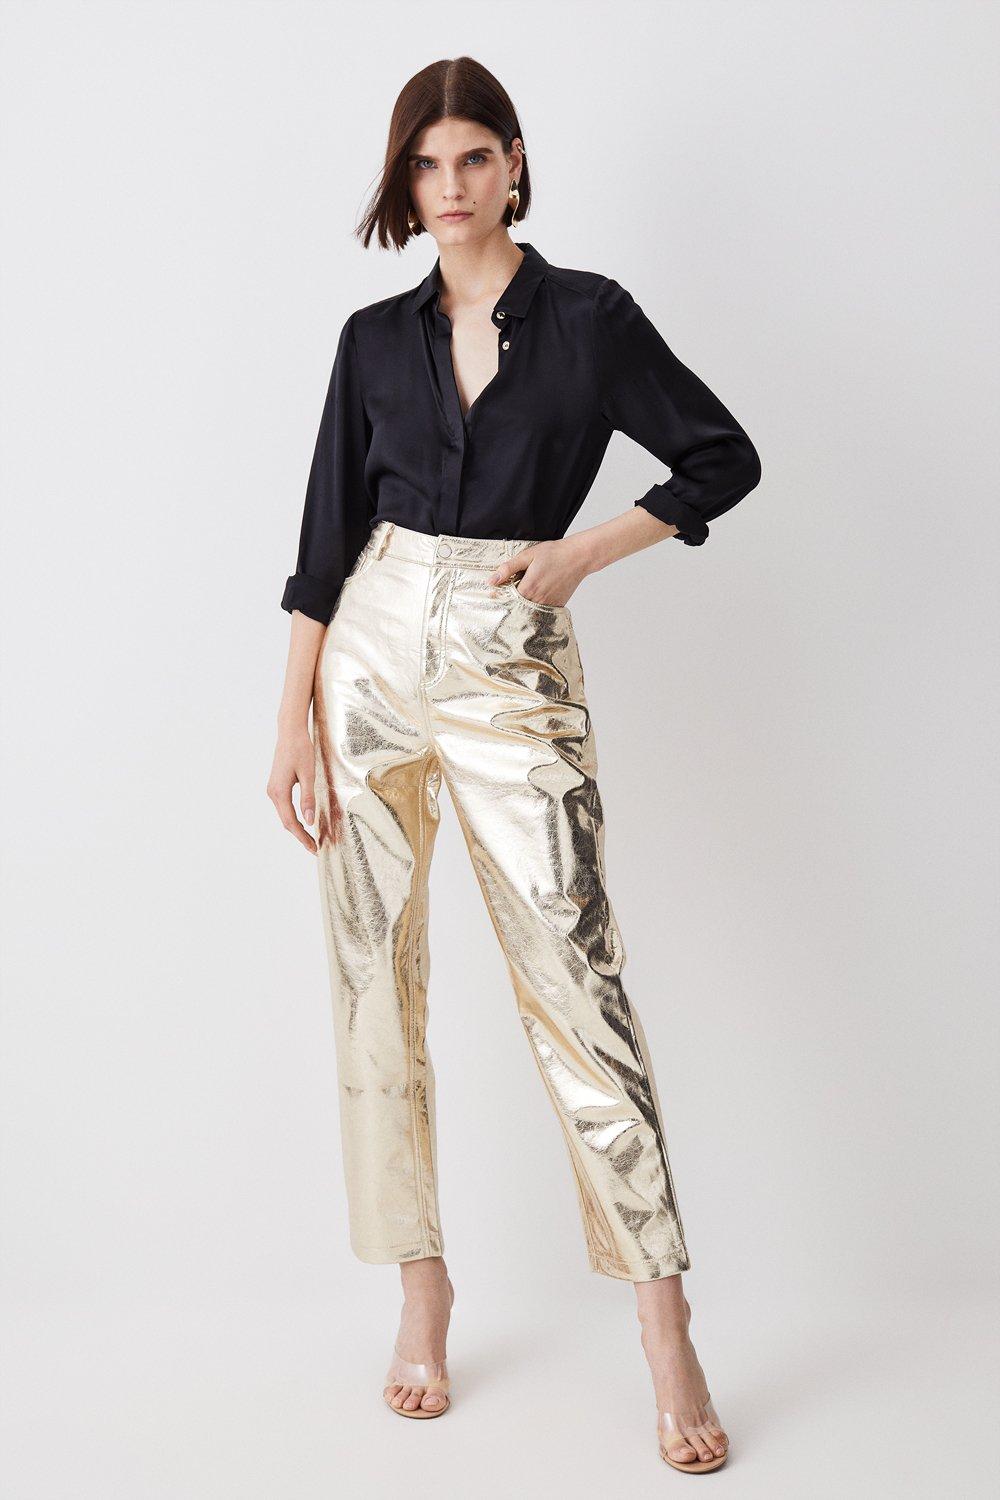 Womens Sequin Legging Trousers Ladies Stretch Drawstring Waist High Waist  Silver Gold Pants (Tag S(UK 6), Gold) : Amazon.co.uk: Fashion